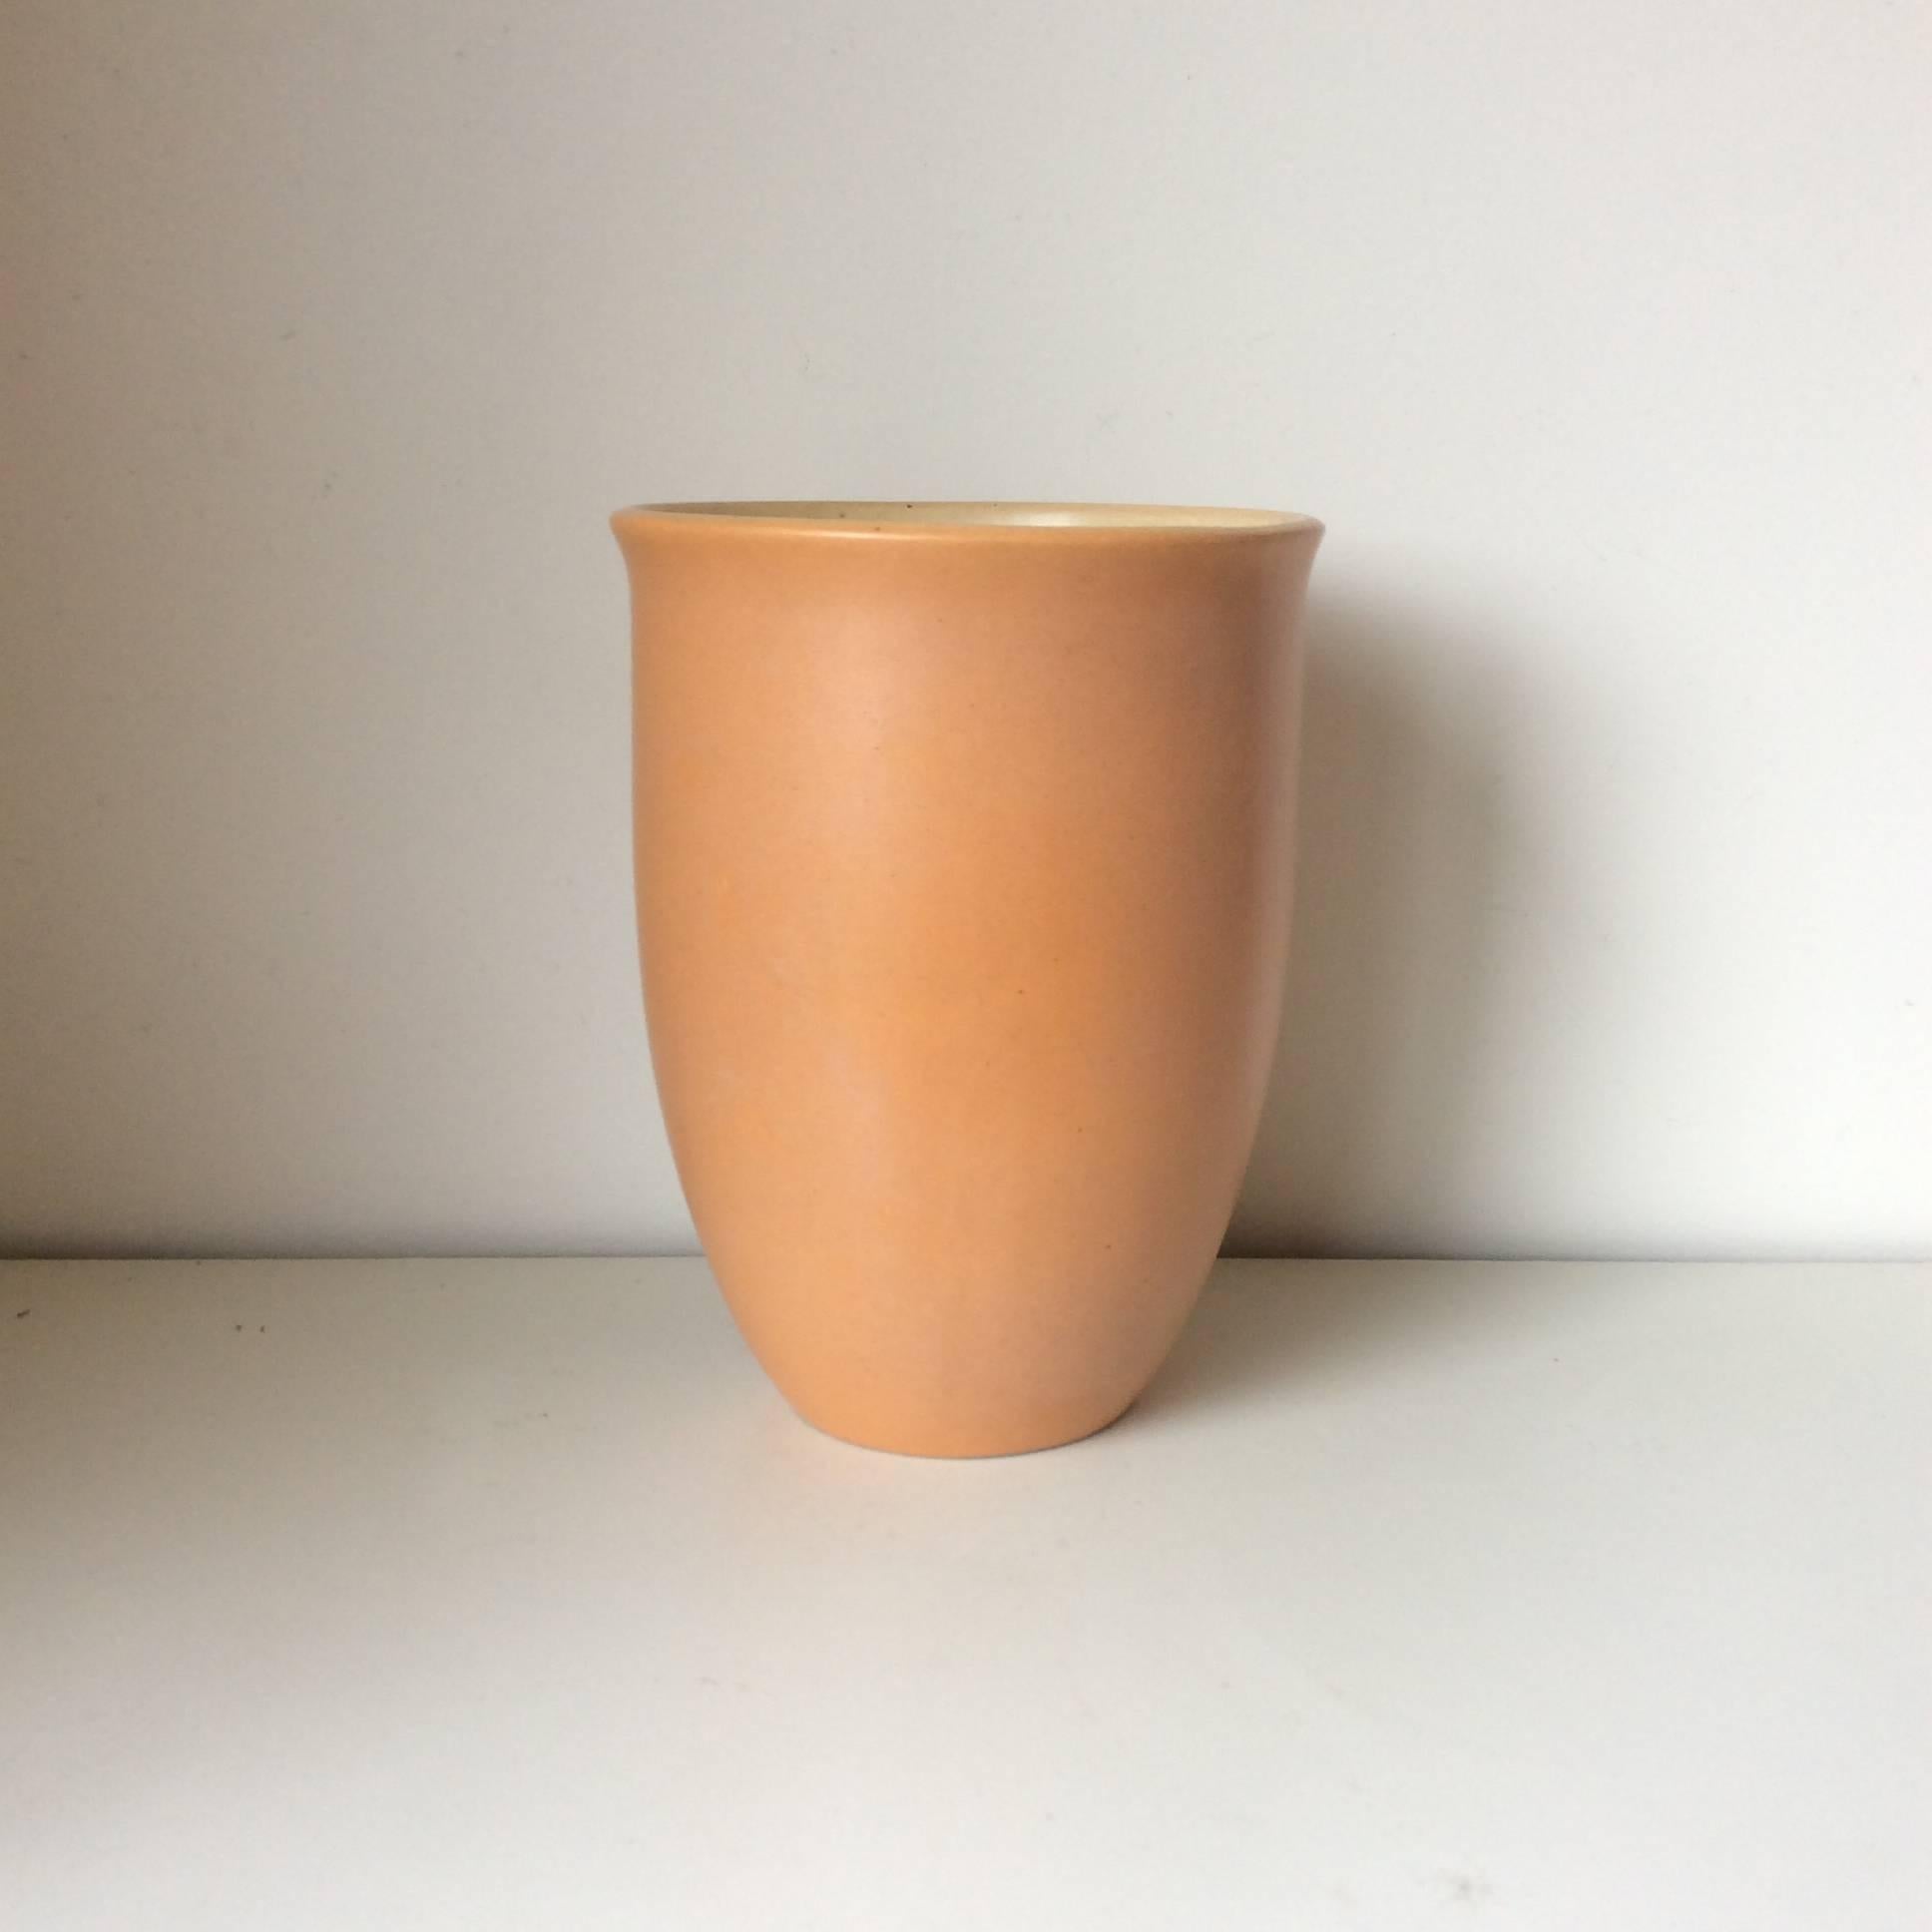 Paul Chambost egg shell ceramic vase, circa 1950, France.
Dimensions: Height 20 cm, diameter 14 cm.
Good original condition.
We ship worldwide
 All purchases are covered by our Buyer Protection Guarantee.
This item can be returned within 14 days of